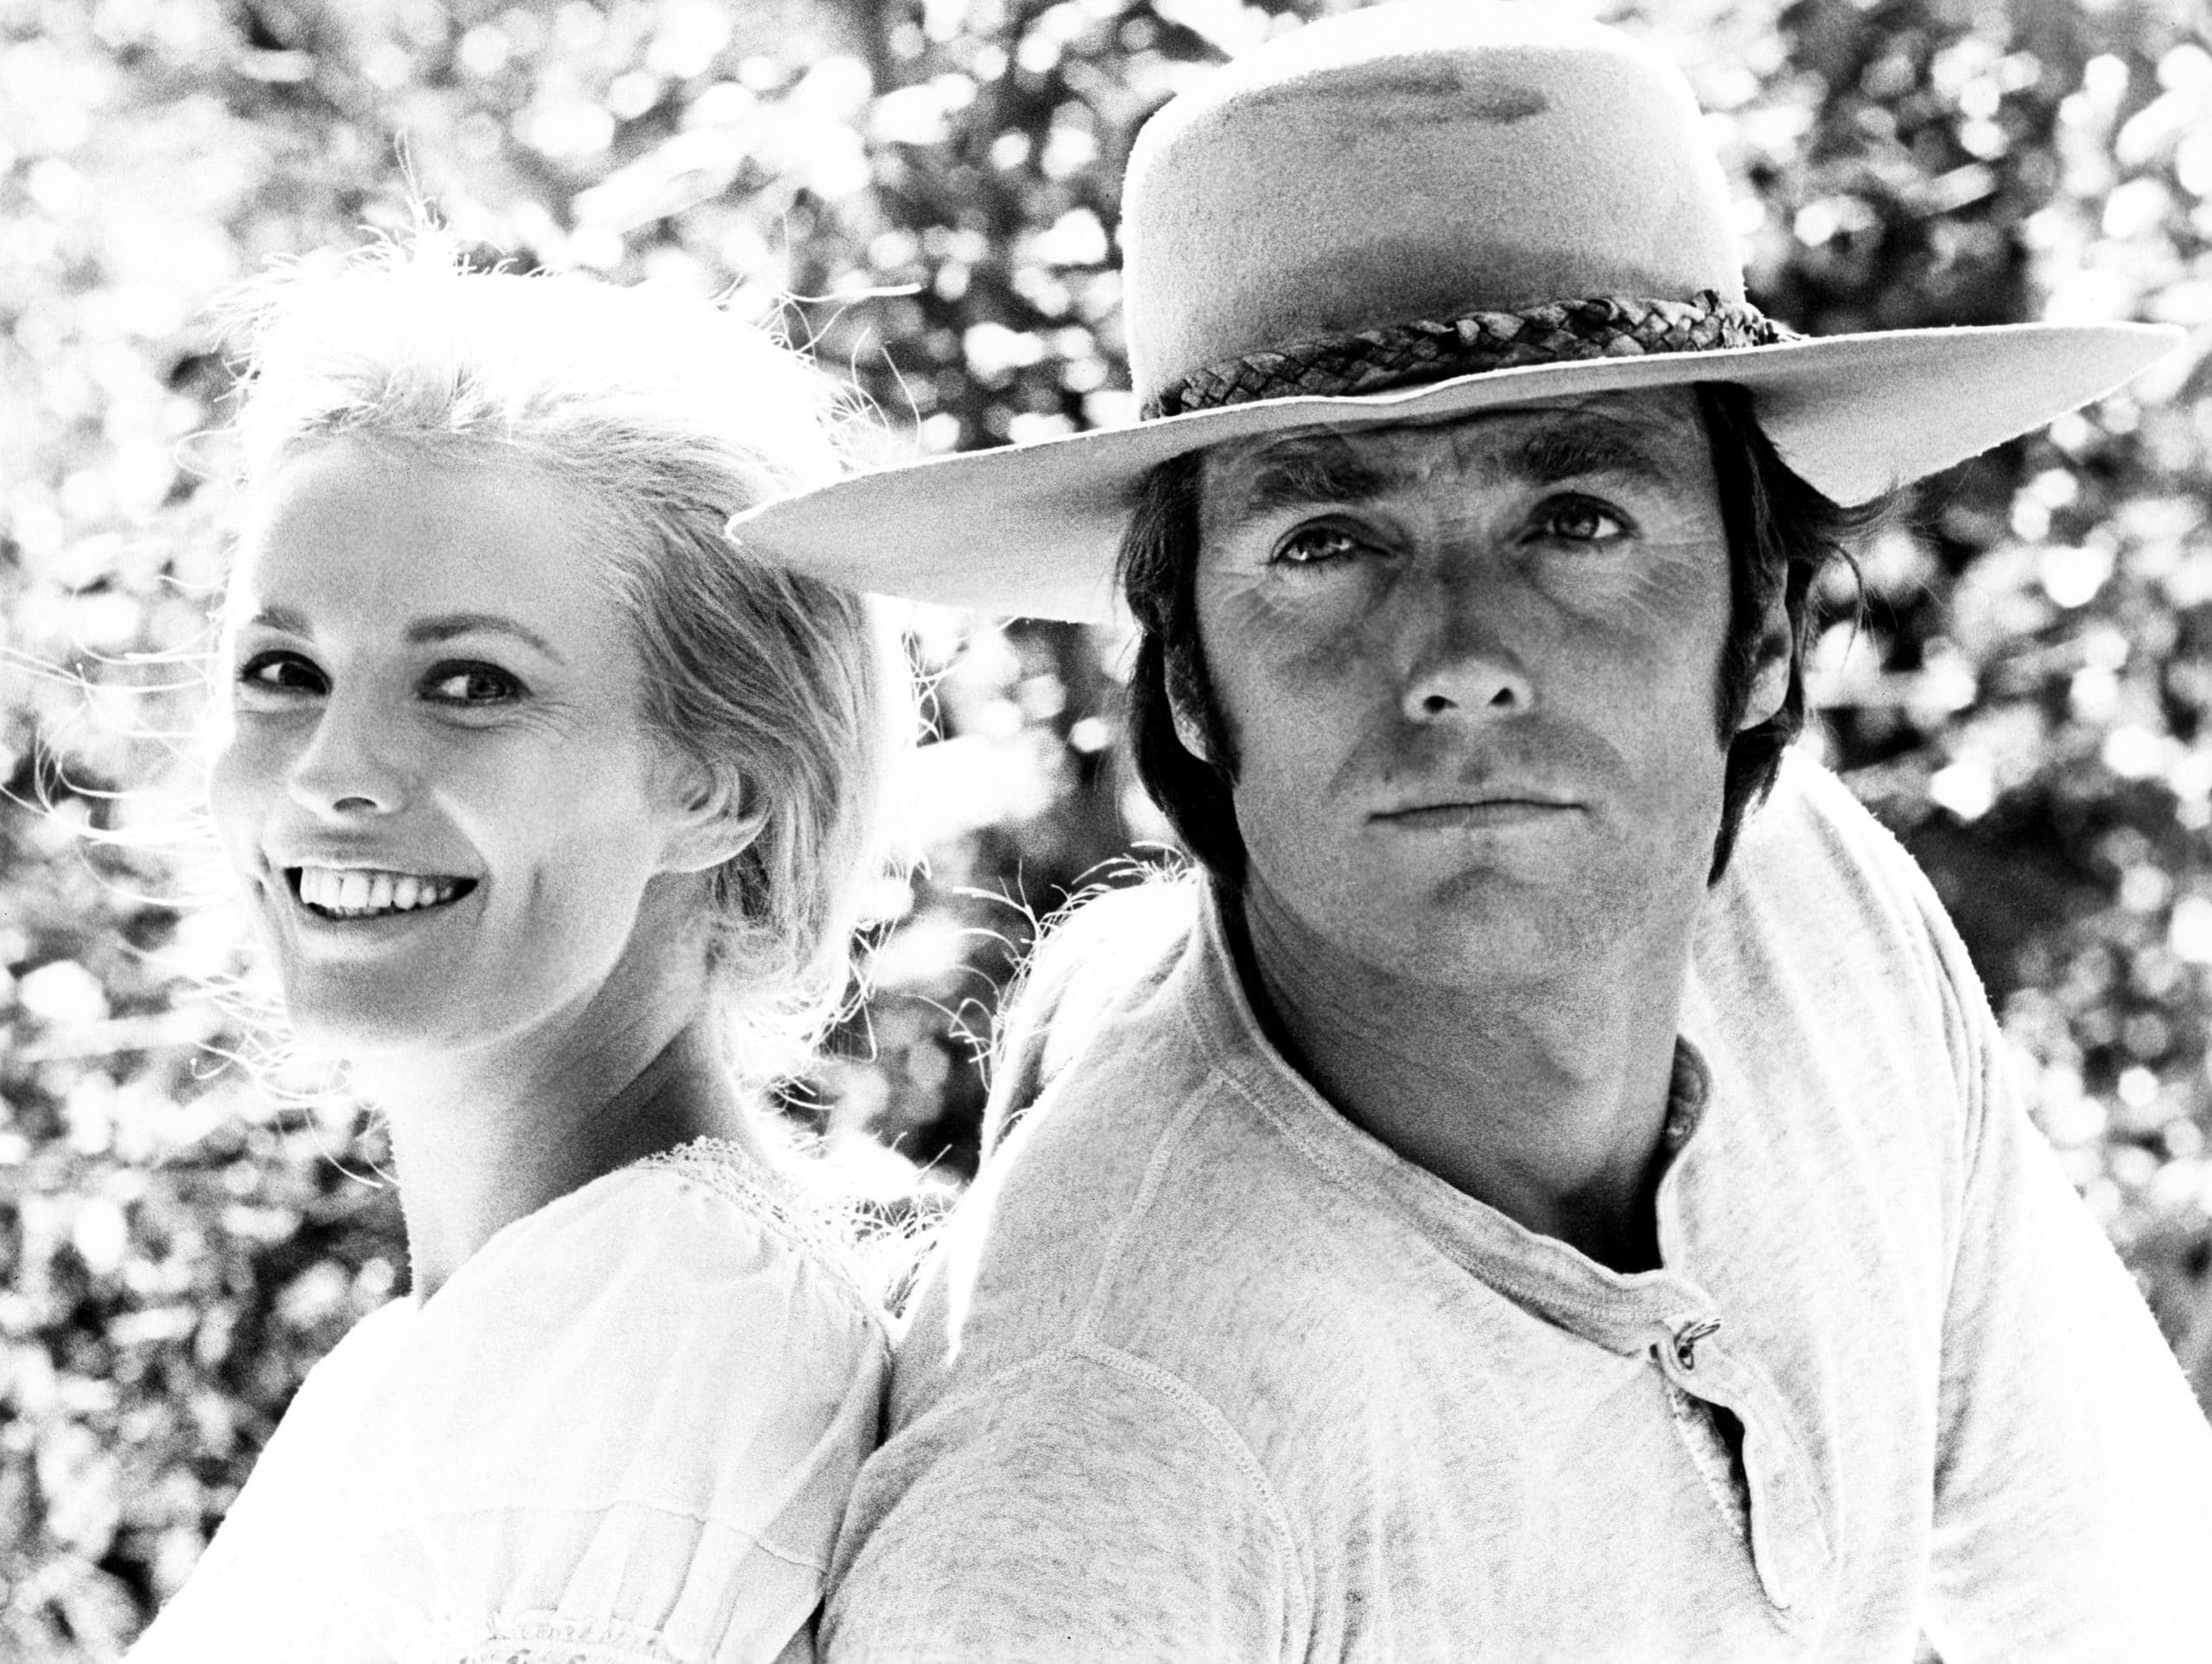 PAINT YOUR WAGON, from left, Jean Seberg, Clint Eastwood, 1969